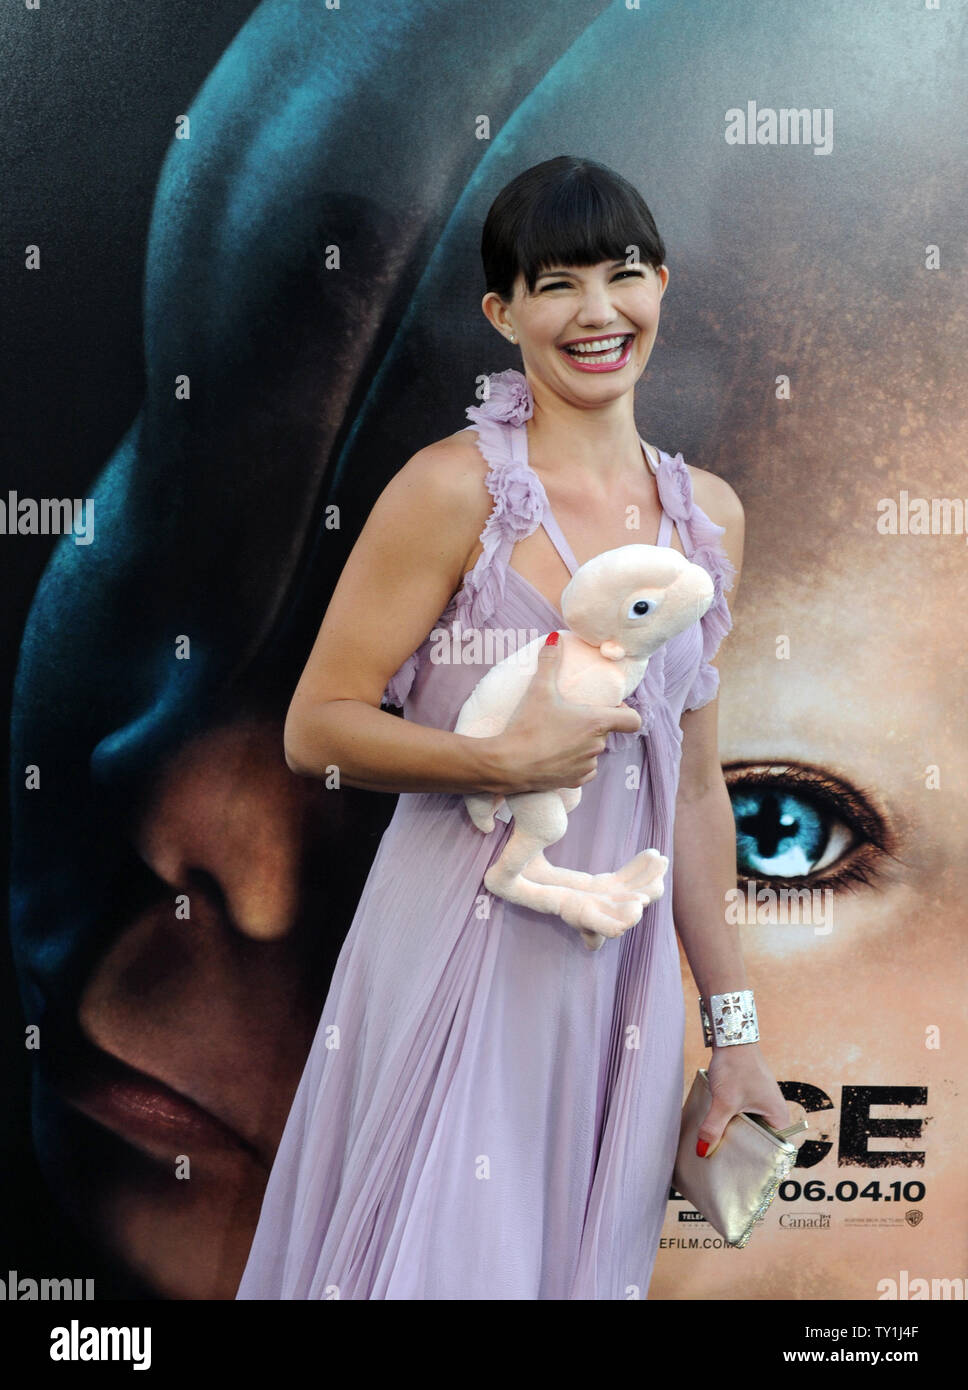 https://c8.alamy.com/comp/TY1J4F/french-actress-delphine-chaneac-who-stars-in-the-motion-picture-sci-fi-thriller-splice-attends-the-premiere-of-the-film-at-graumans-chinese-theatre-in-the-hollywood-section-of-los-angeles-on-june-2-2010-upijim-ruymen-TY1J4F.jpg